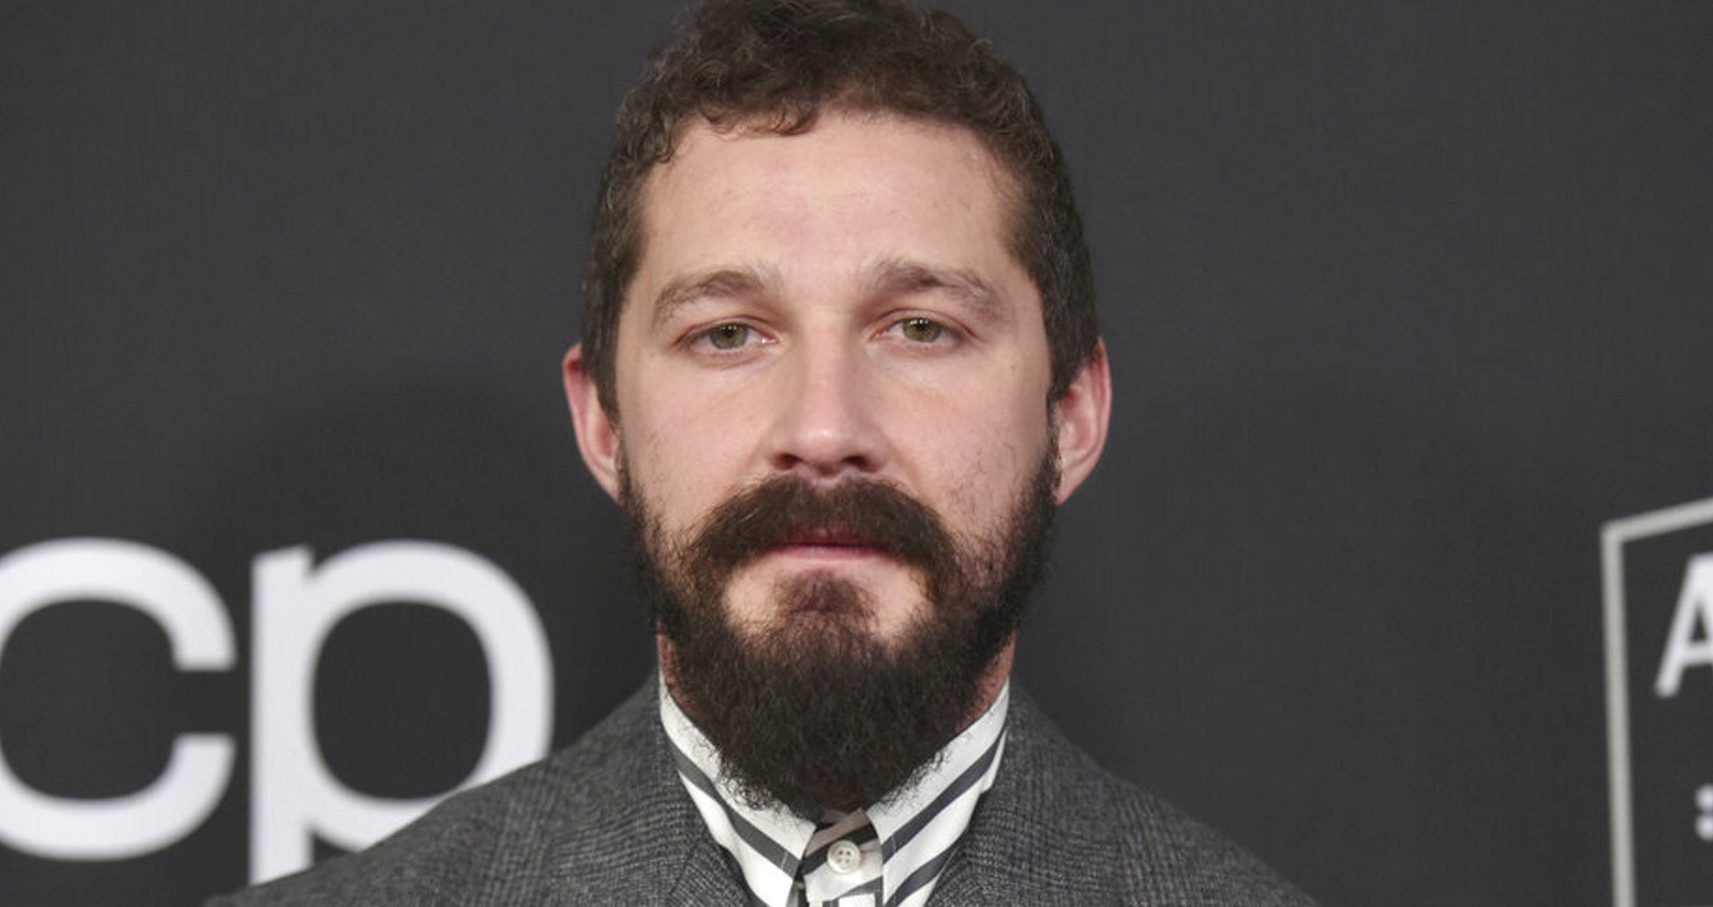 'I Have No Excuses:' Shia Labeouf Responds To FKA Twig Allegations